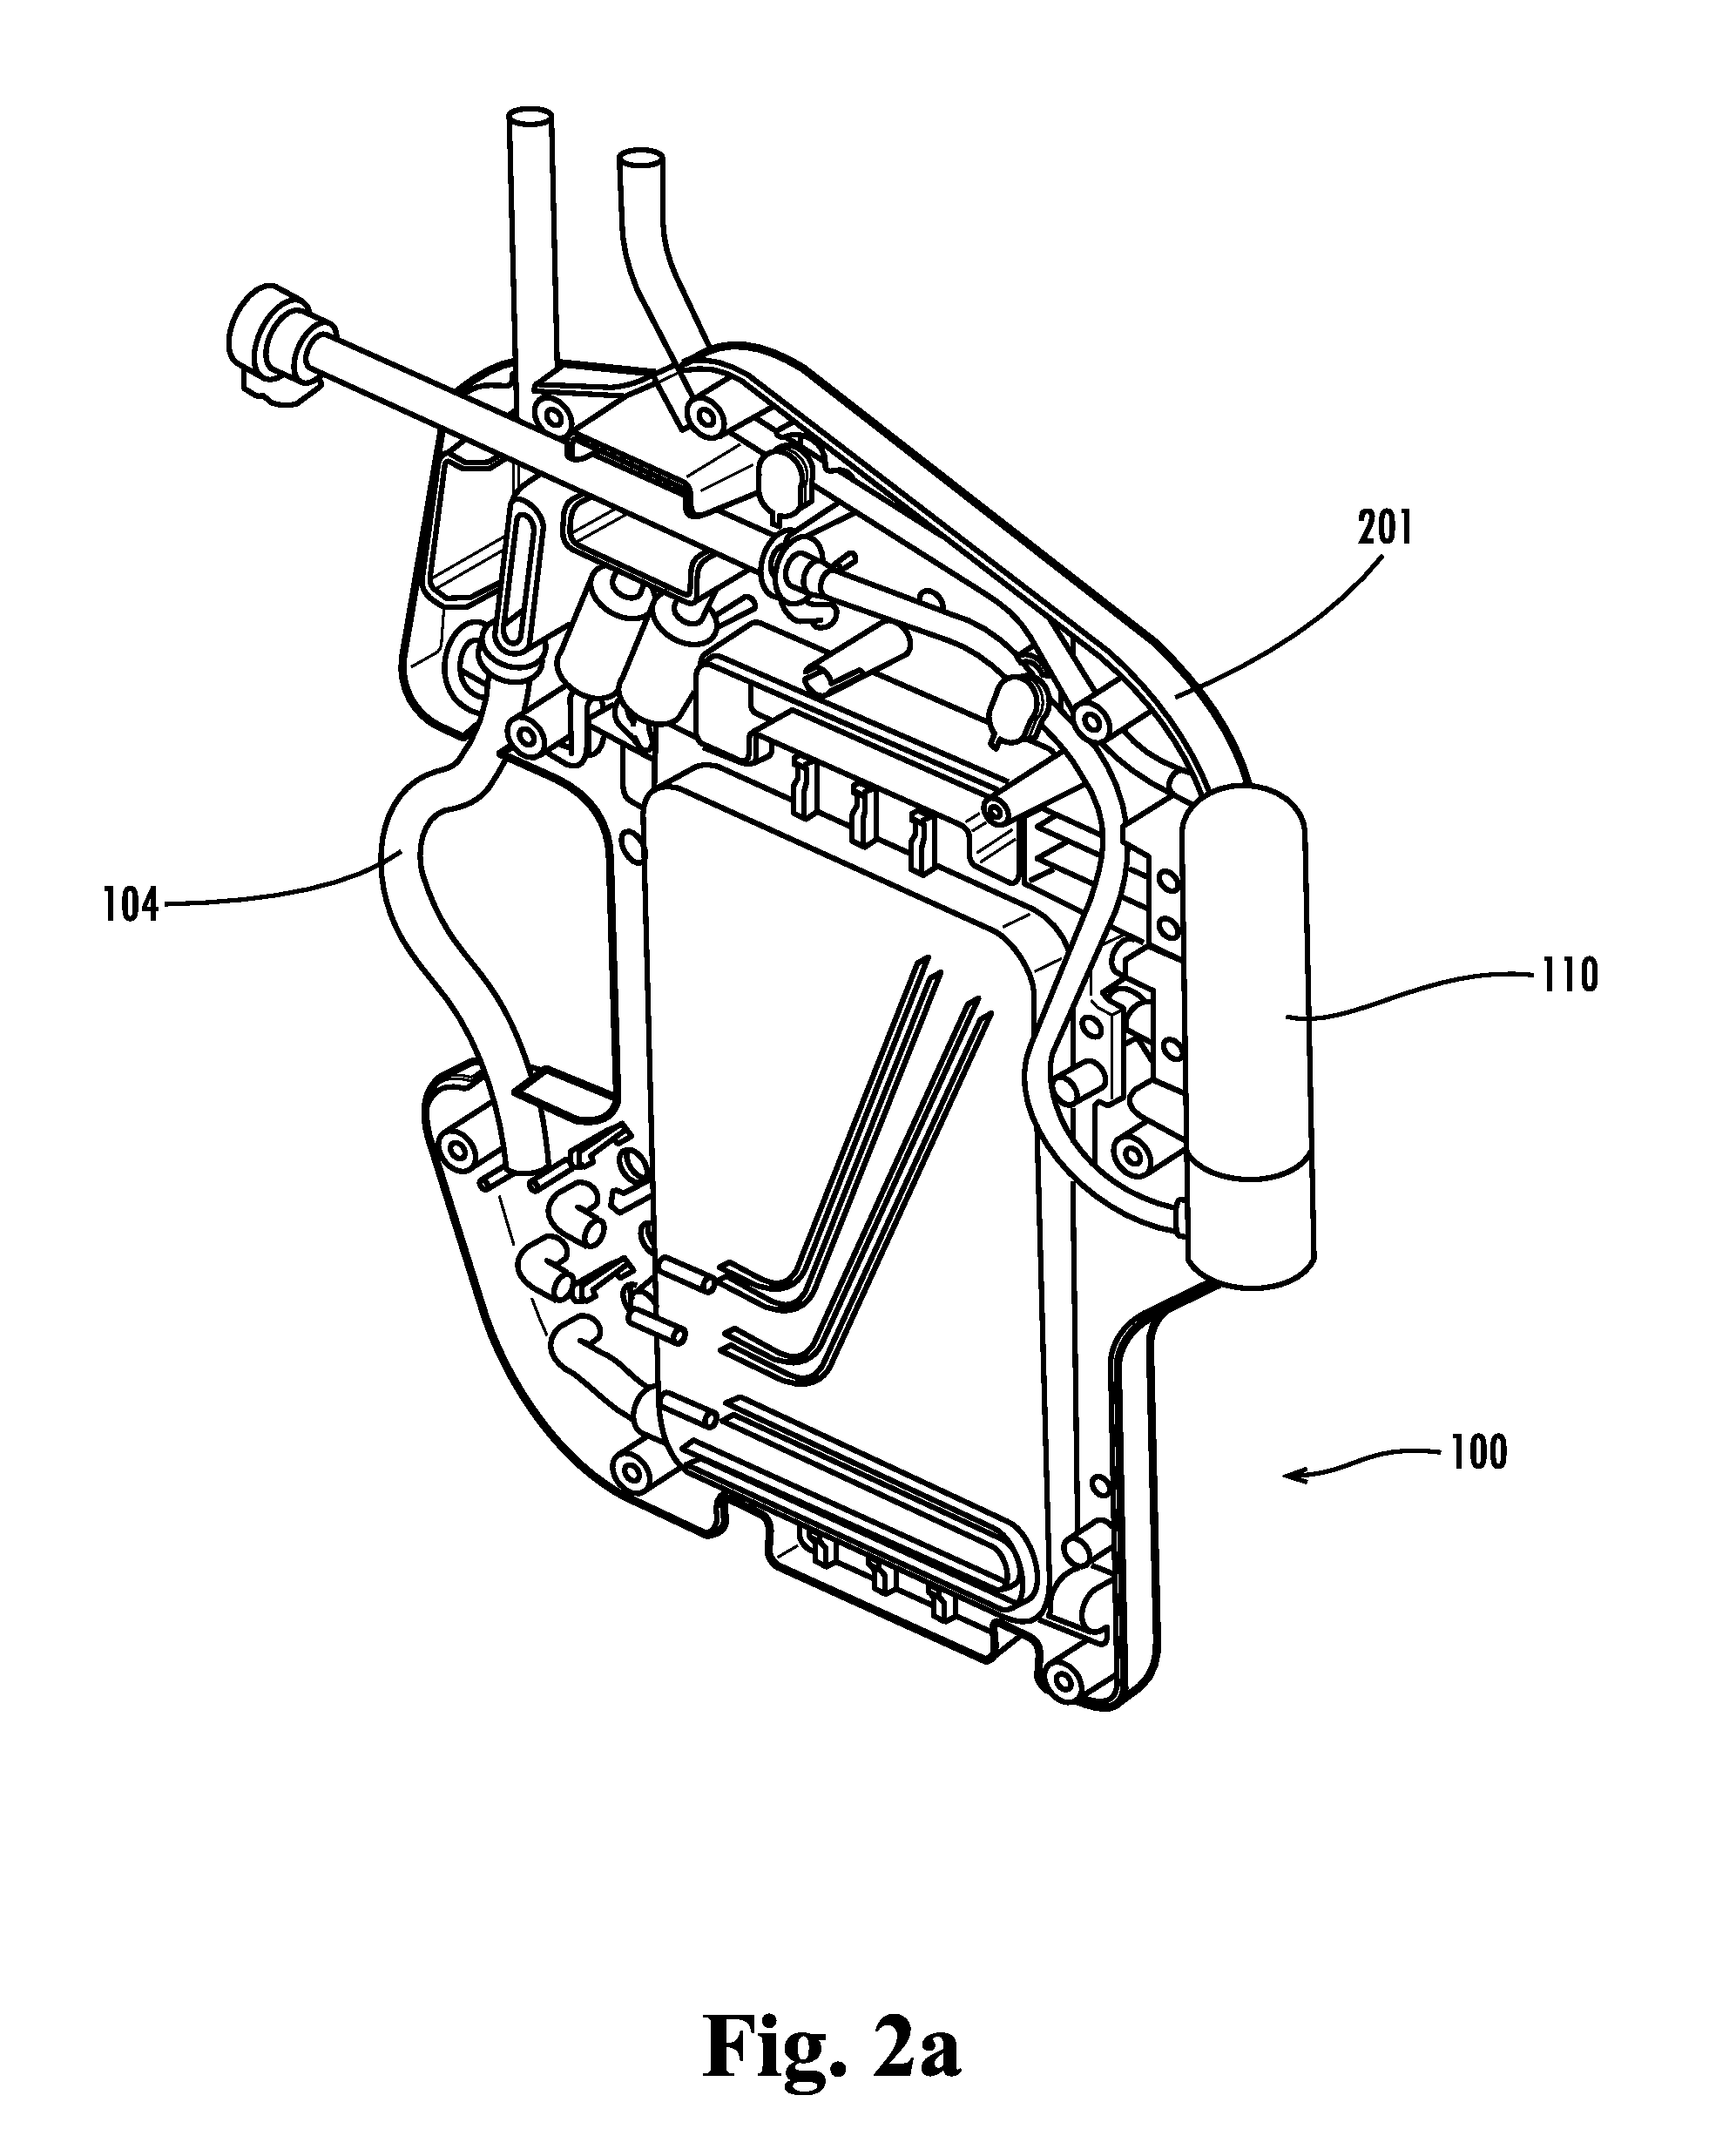 Alignment and Attachment of a Heat Exchanger Cartridge to a Pump Device